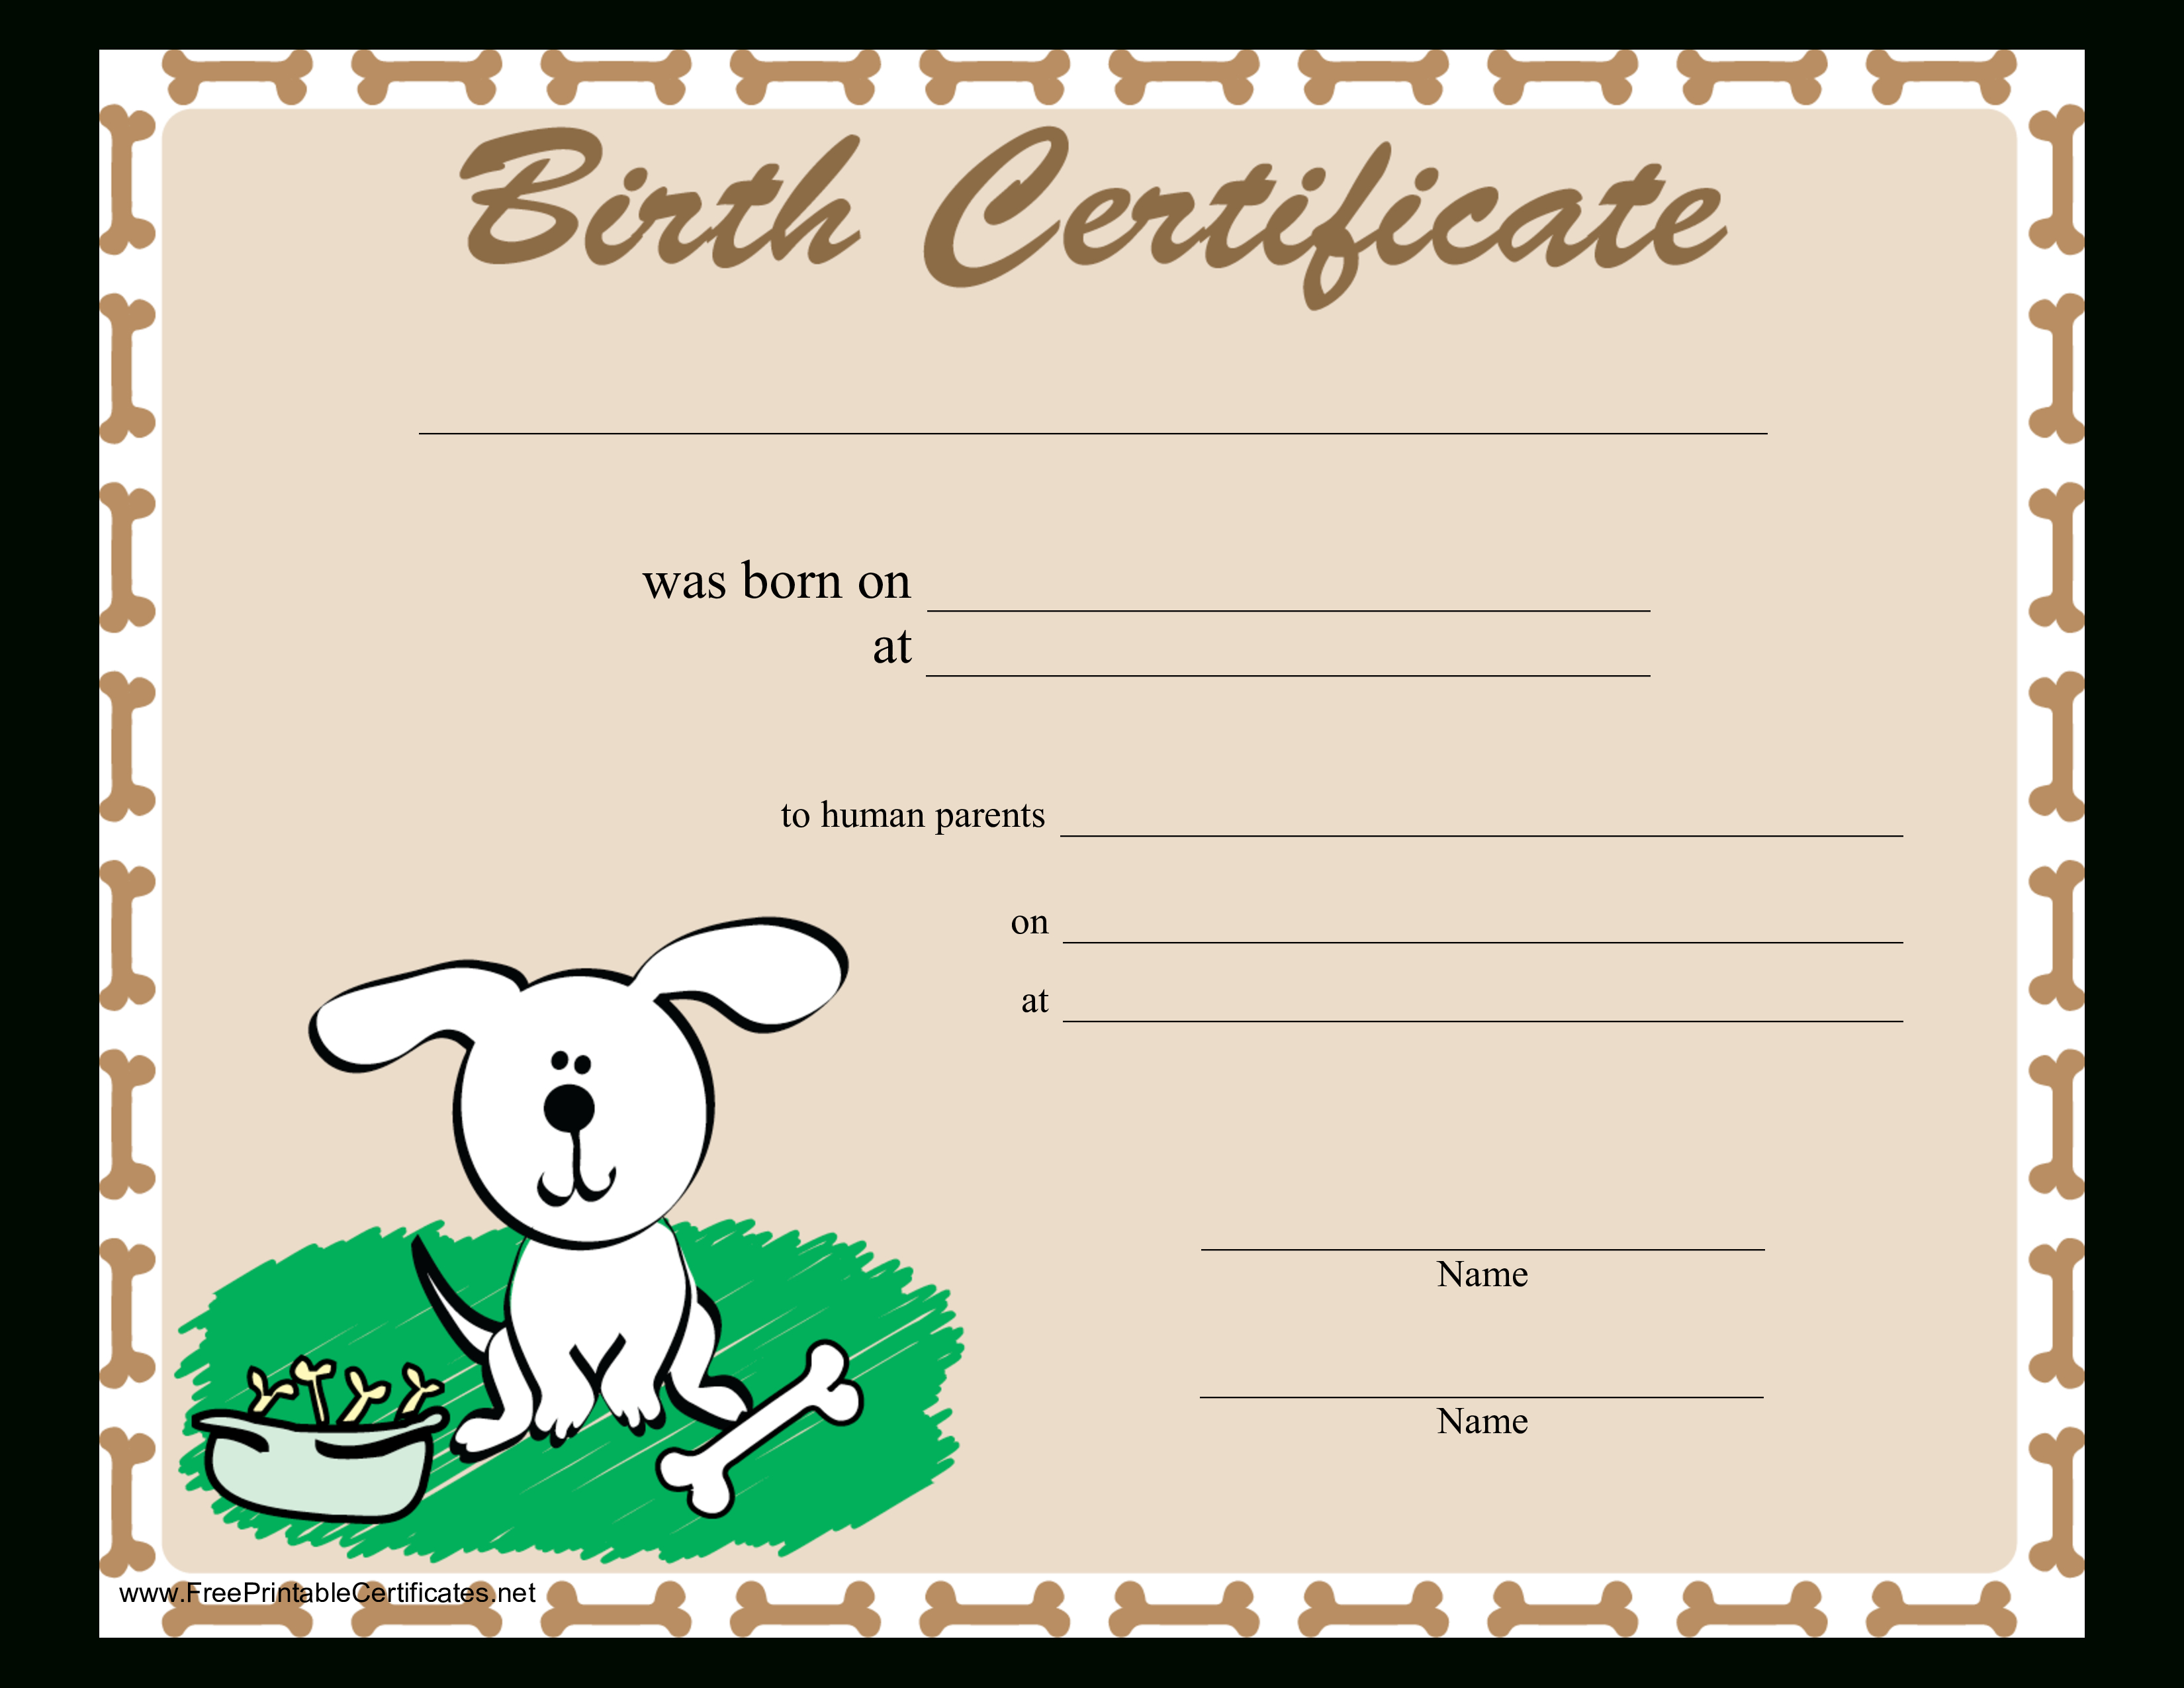 Sample Dog Birth Certificate - How To Create A Dog Birth Certificate - Free Printable Birth Certificates For Puppies